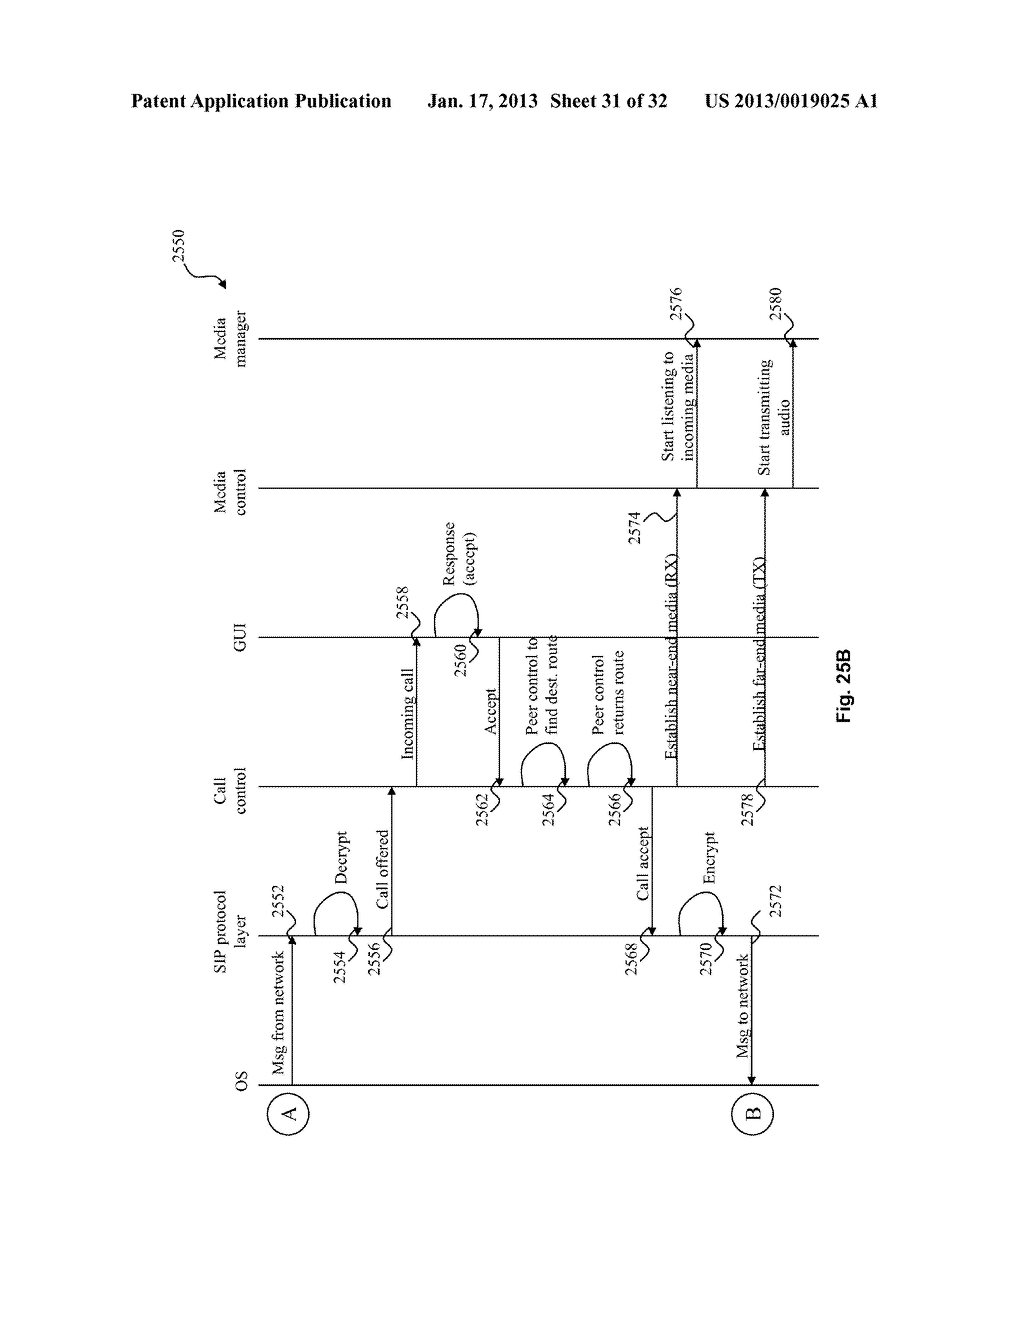 SYSTEM AND METHOD FOR RELIABLE VIRTUAL BI-DIRECTIONAL DATA STREAM     COMMUNICATIONS WITH SINGLE SOCKET POINT-TO-MULTIPOINT CAPABILITYAANM CHATURVEDI; SIVAKUMAR R.AACI ALLENAAST TXAACO USAAGP CHATURVEDI; SIVAKUMAR R. ALLEN TX USAANM GUNDABATHULA; SATISHAACI IRVINGAAST TXAACO USAAGP GUNDABATHULA; SATISH IRVING TX USAANM KRISHNAN; RAJARAMANAACI CHENNAIAACO INAAGP KRISHNAN; RAJARAMAN CHENNAI IN - diagram, schematic, and image 32